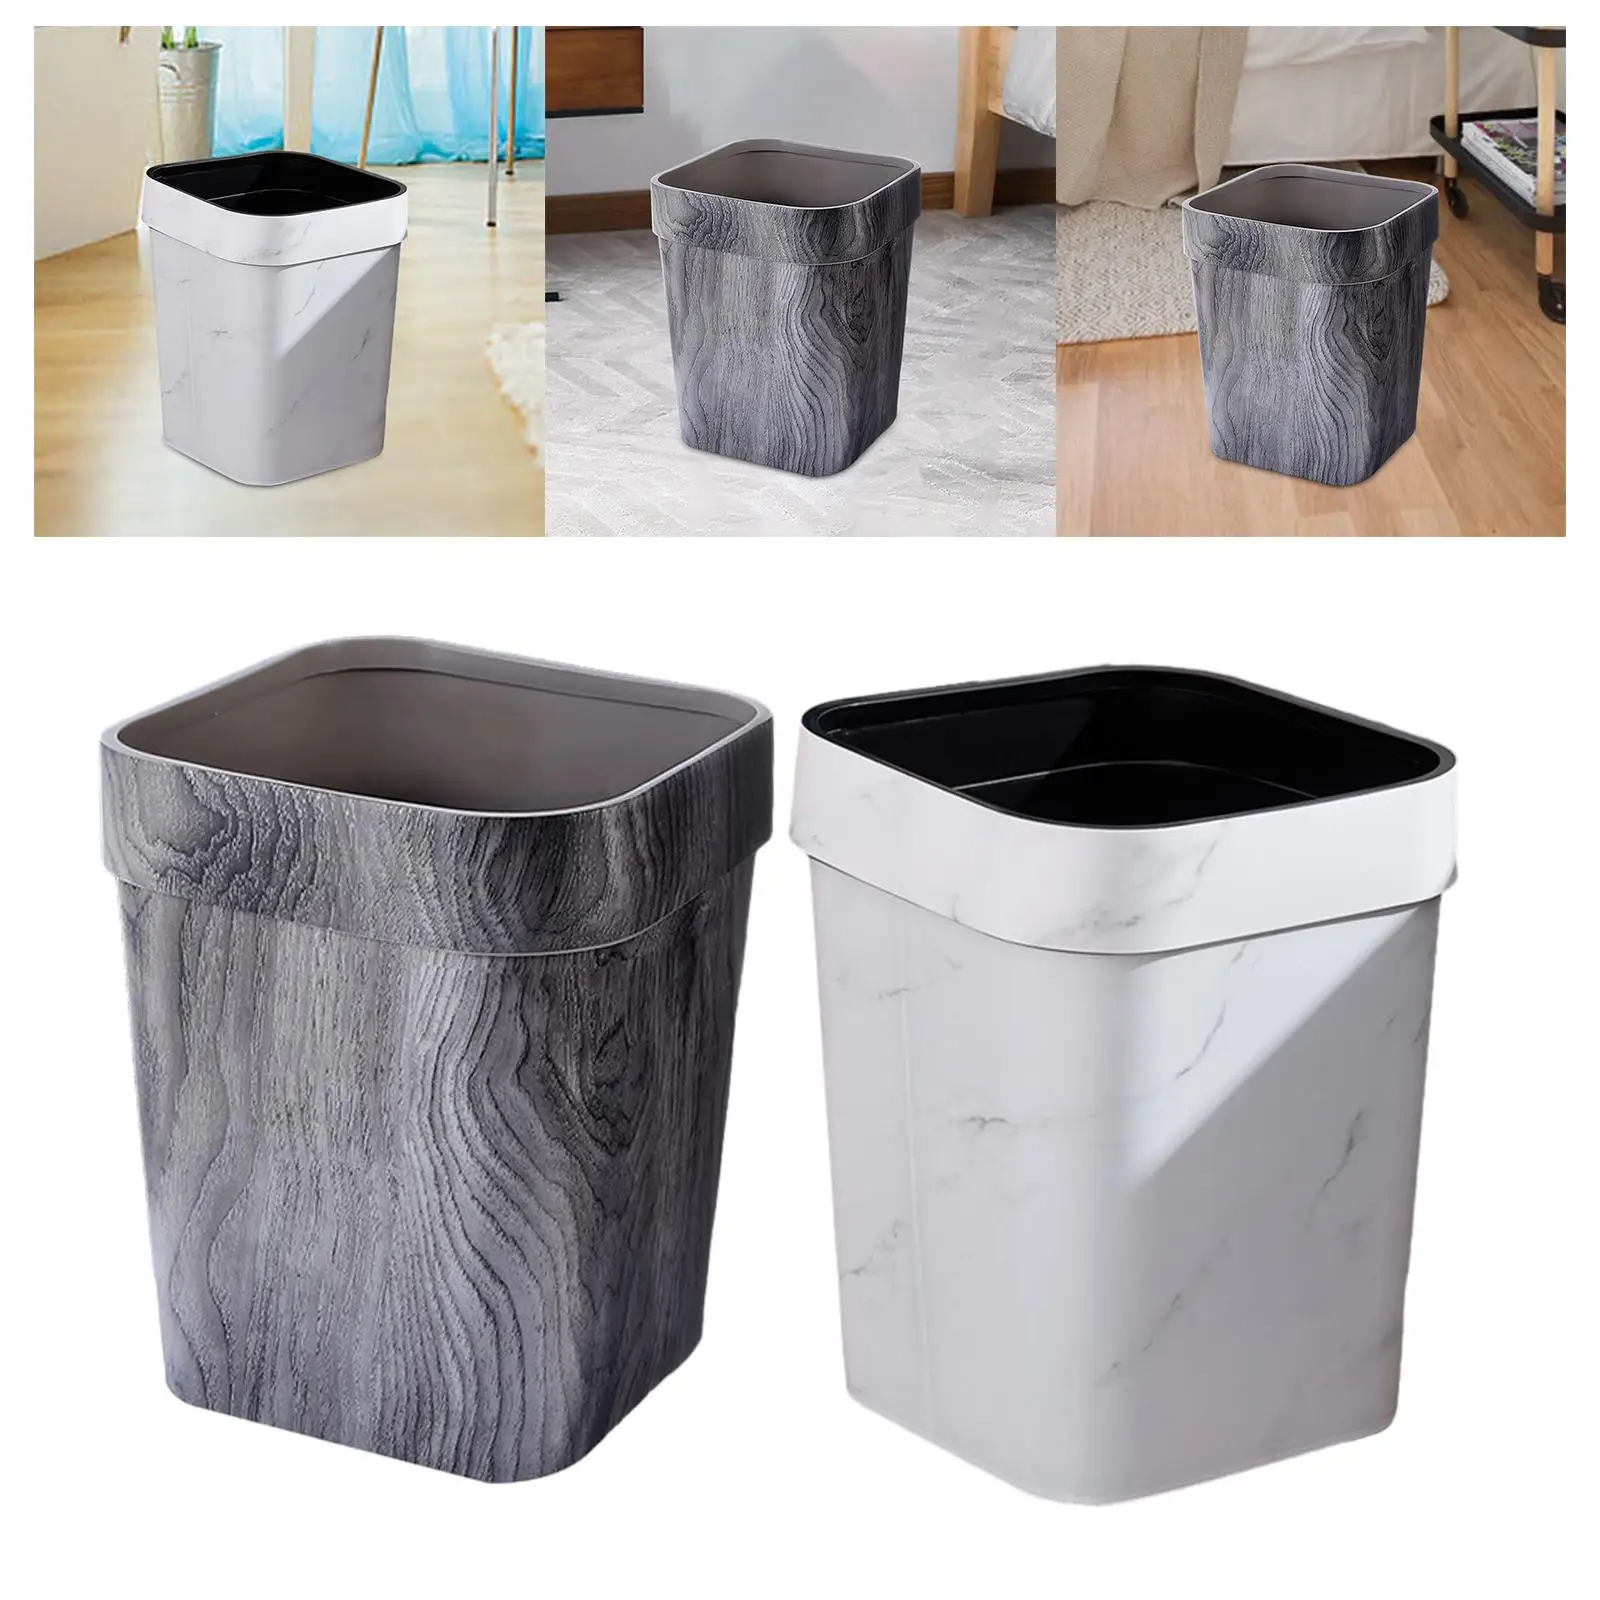 Small Bathroom Trash Can Square 14L Open Mouth Garbage Can Rubbish Bin Waste Basket for Toilet Living Room Home Office Kitchen